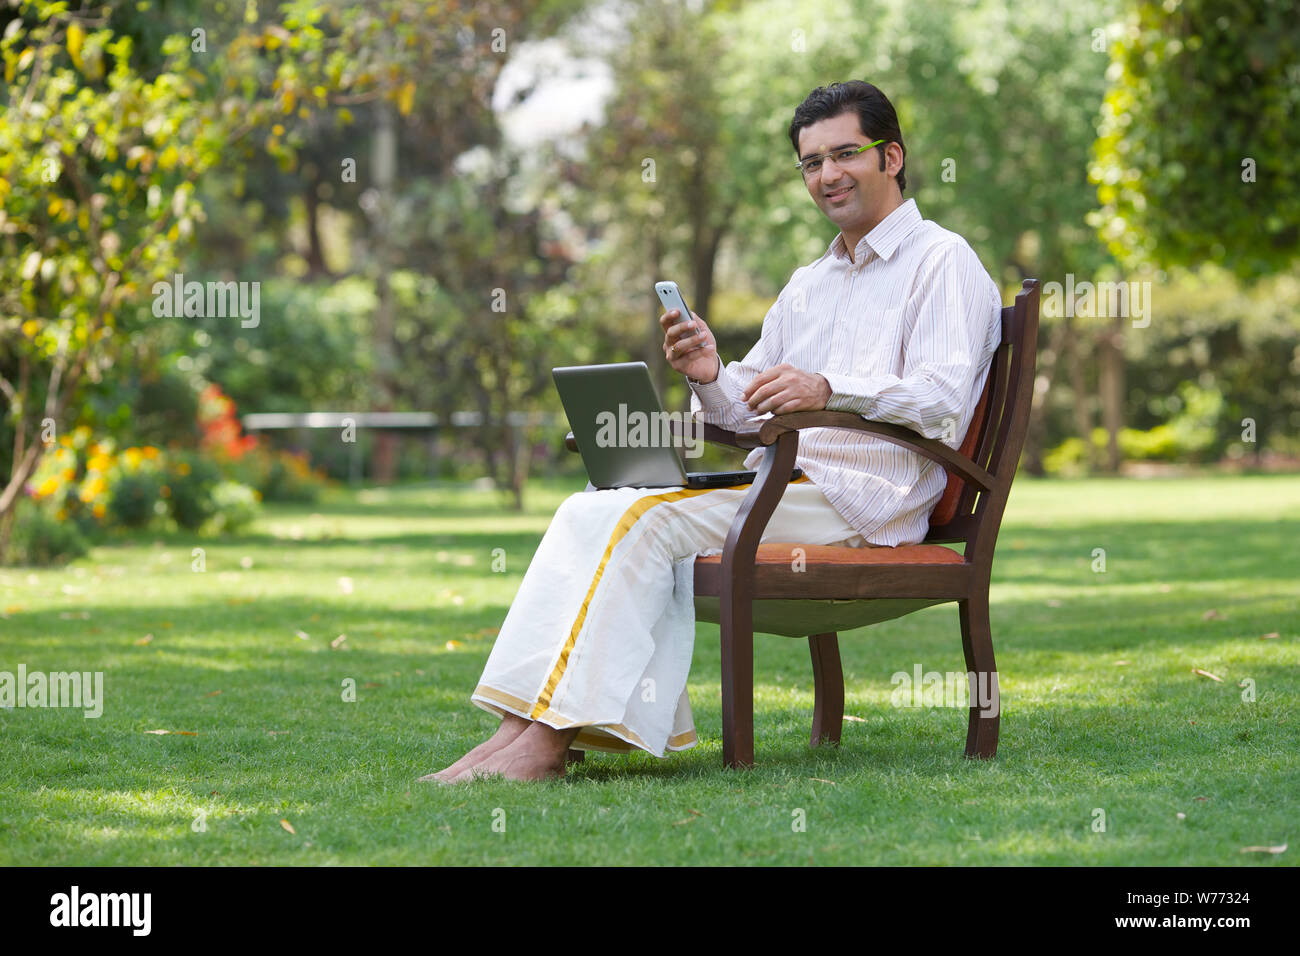 South Indian man text messaging on mobile phone and using laptop Stock Photo